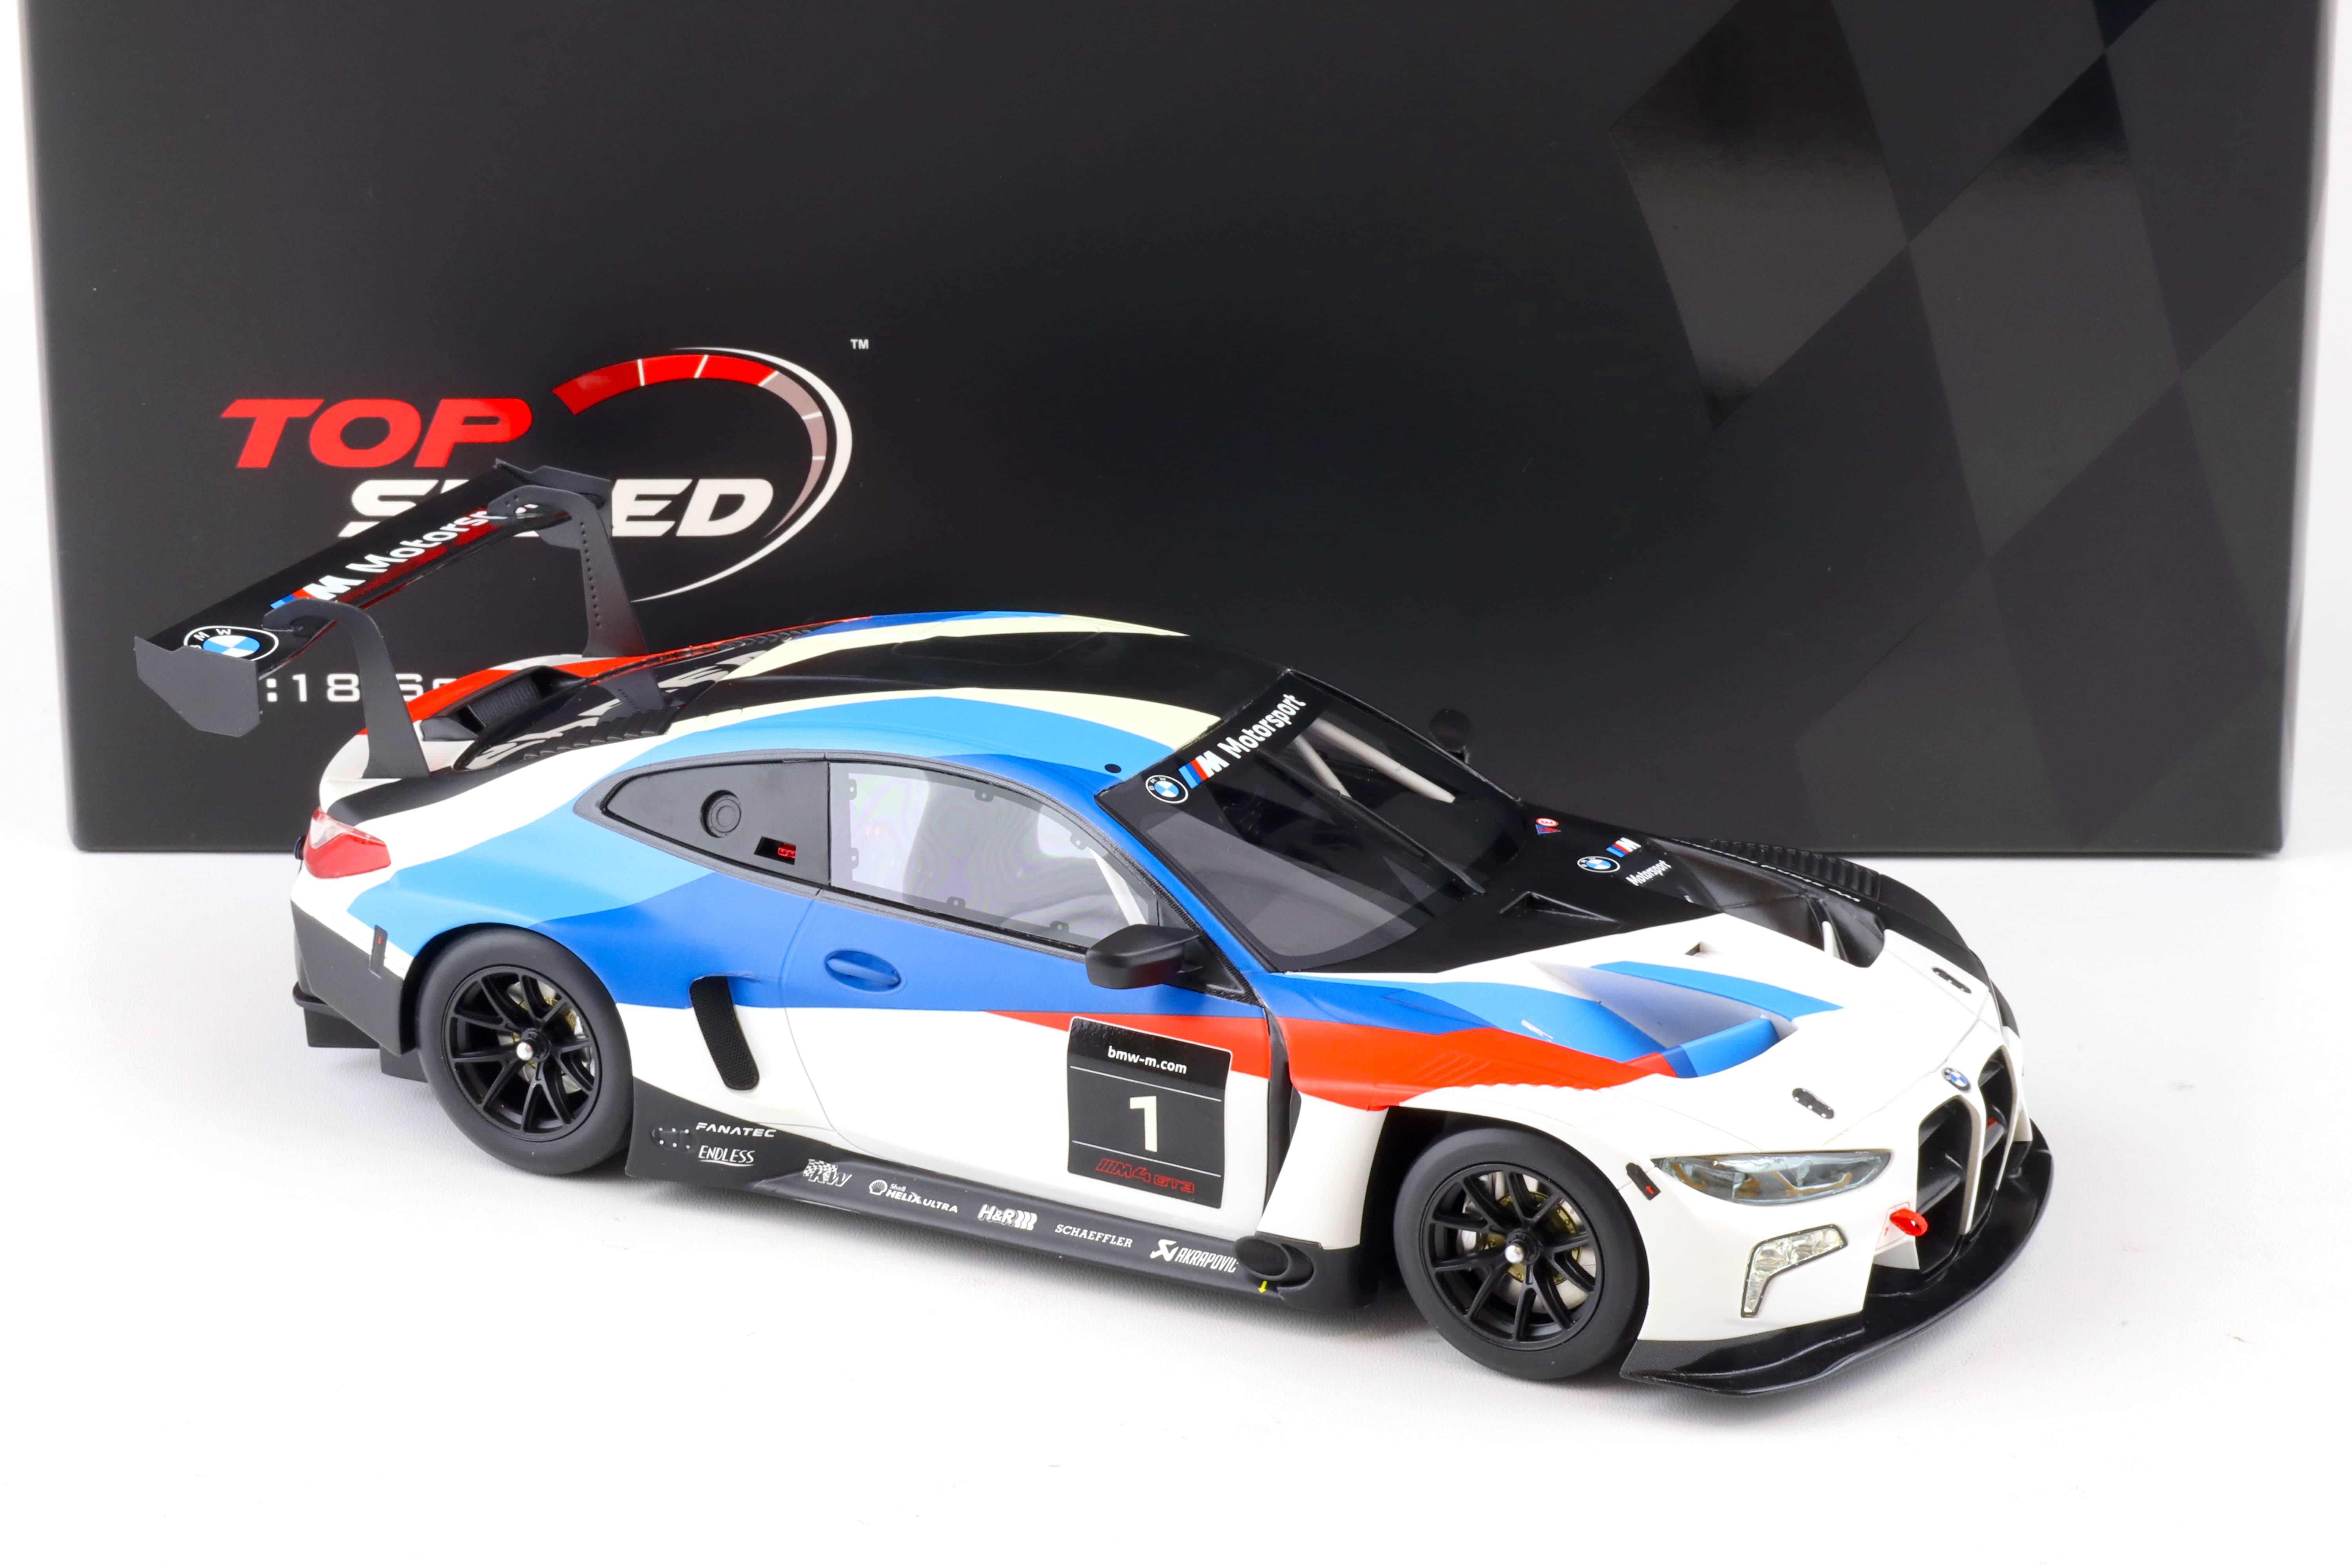 1:18 Top Speed BMW M4 GT3 Presentation Car white/blue/red TS0372